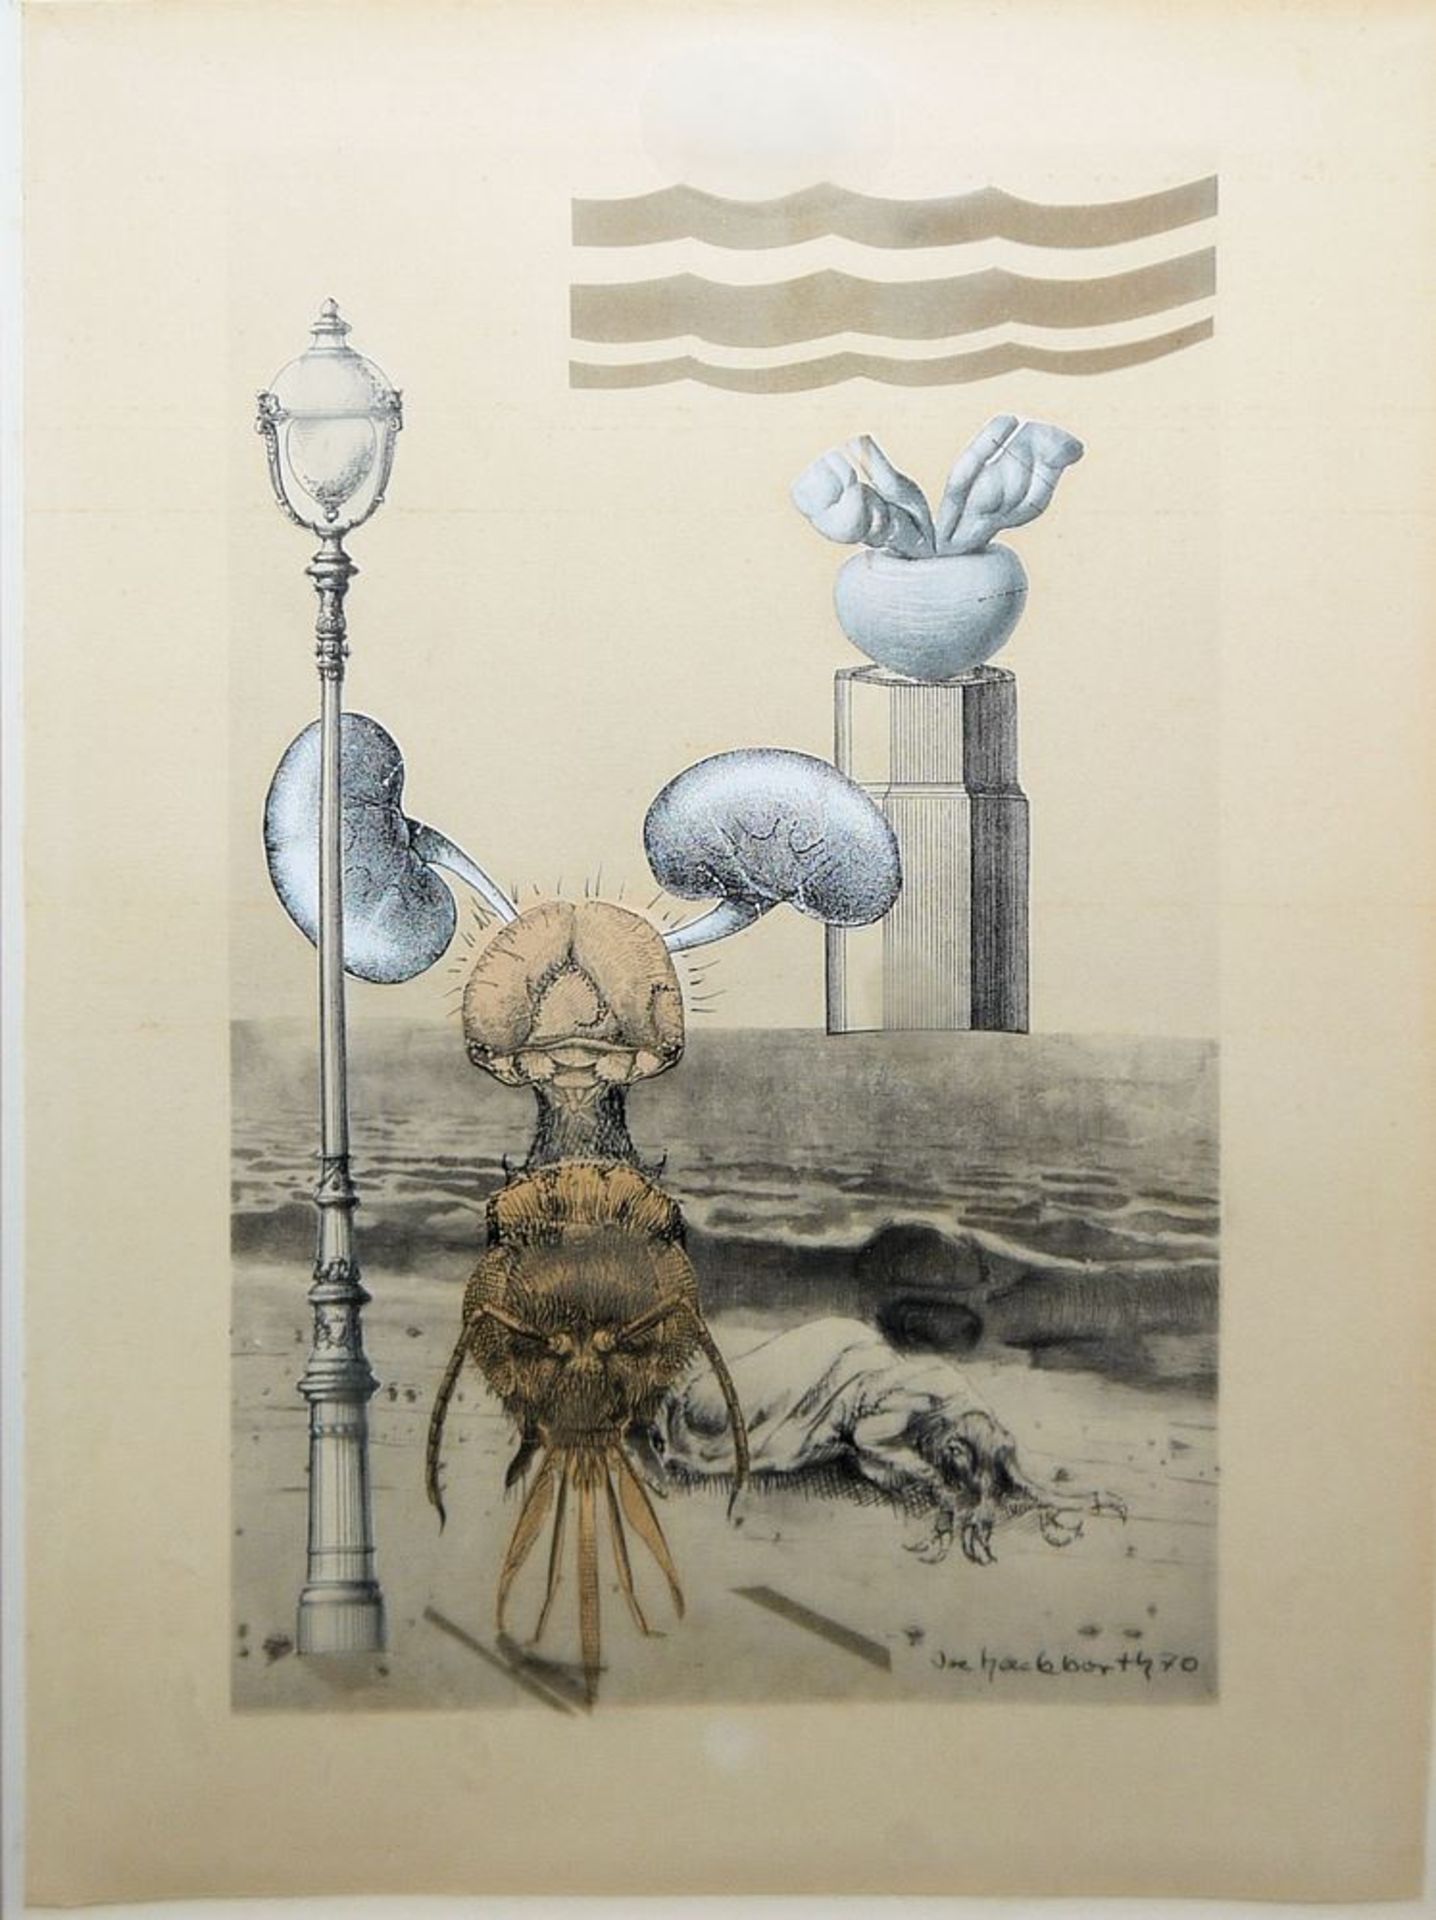 Joe Hackbarth, Sea Creatures with Street Lamp and Kidneys, surreal collage from 1970, framed - Image 3 of 3